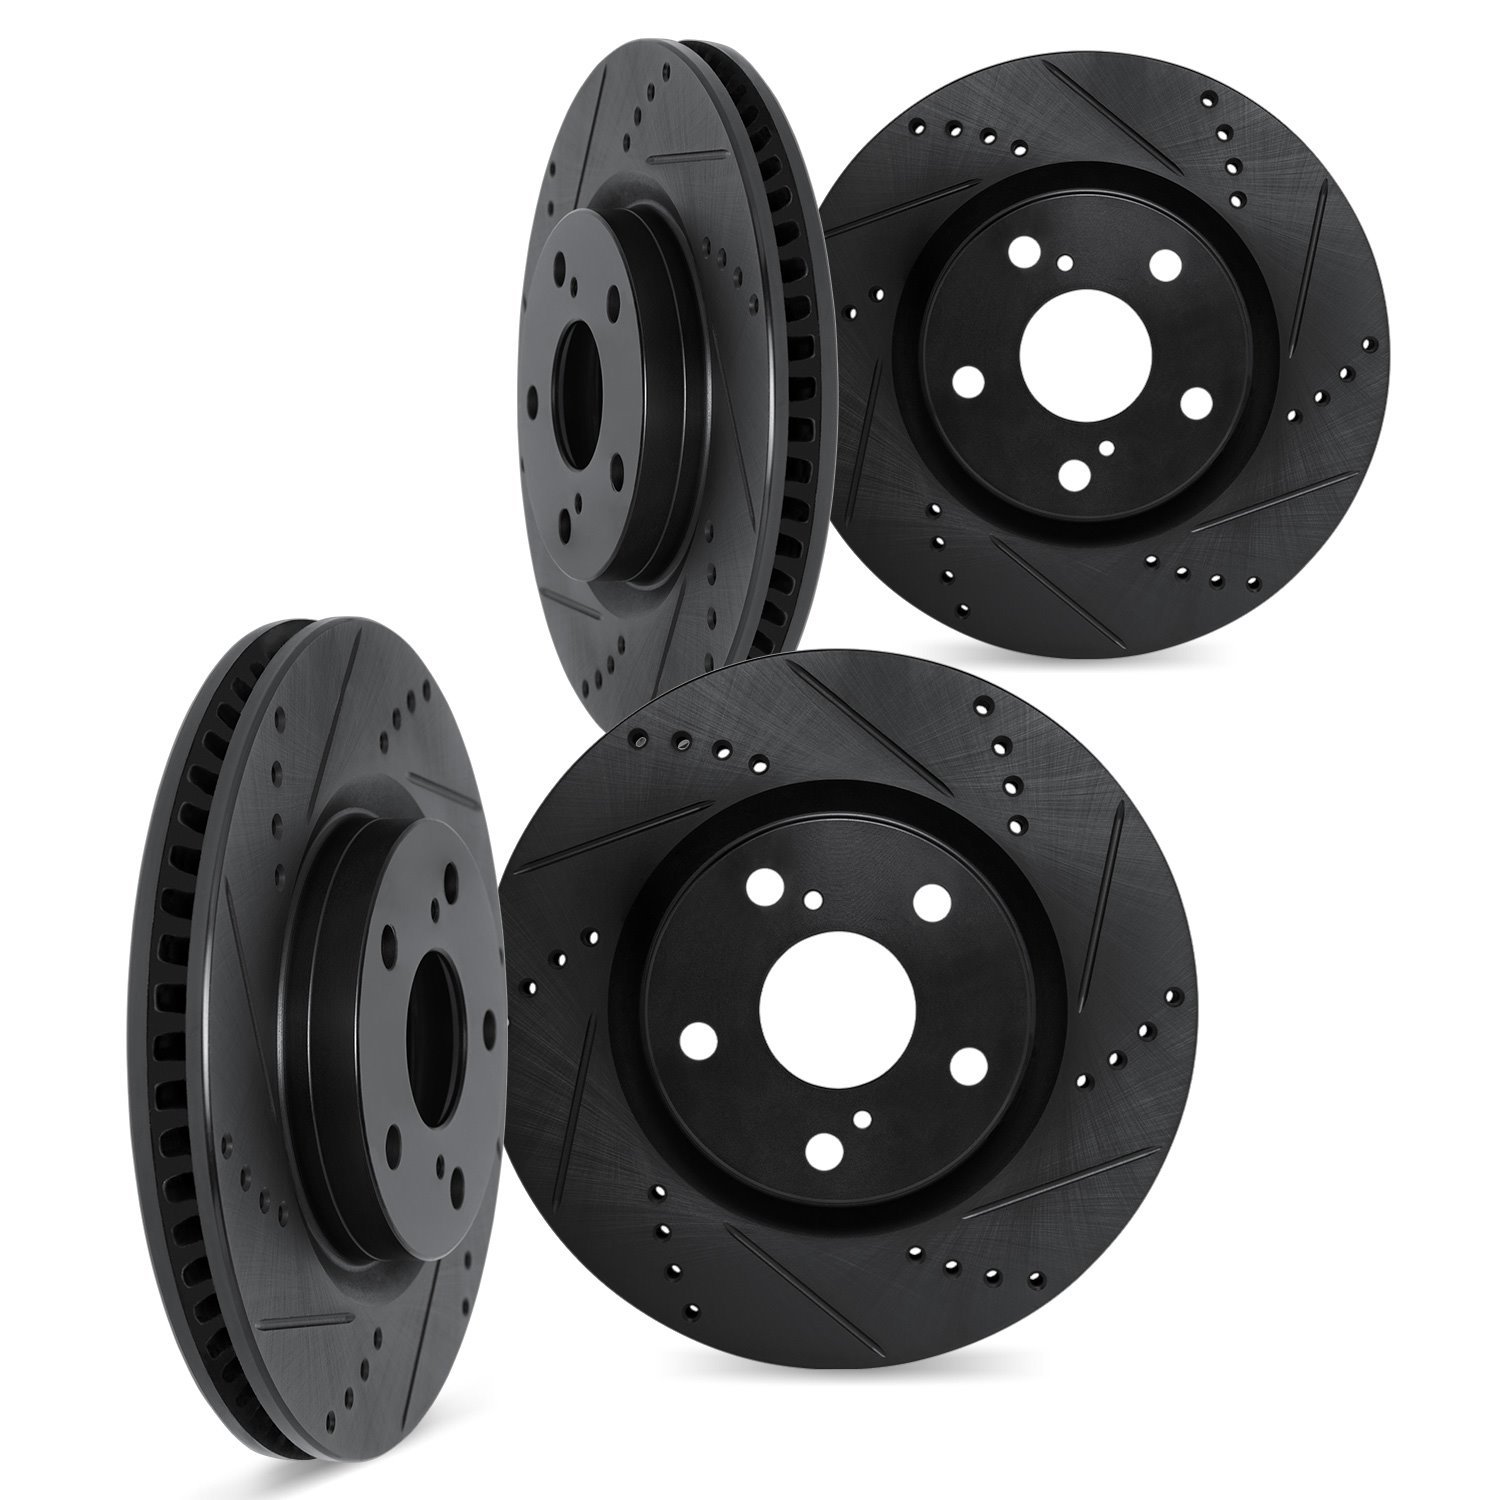 8004-68001 Drilled/Slotted Brake Rotors [Black], 2003-2008 Infiniti/Nissan, Position: Front and Rear